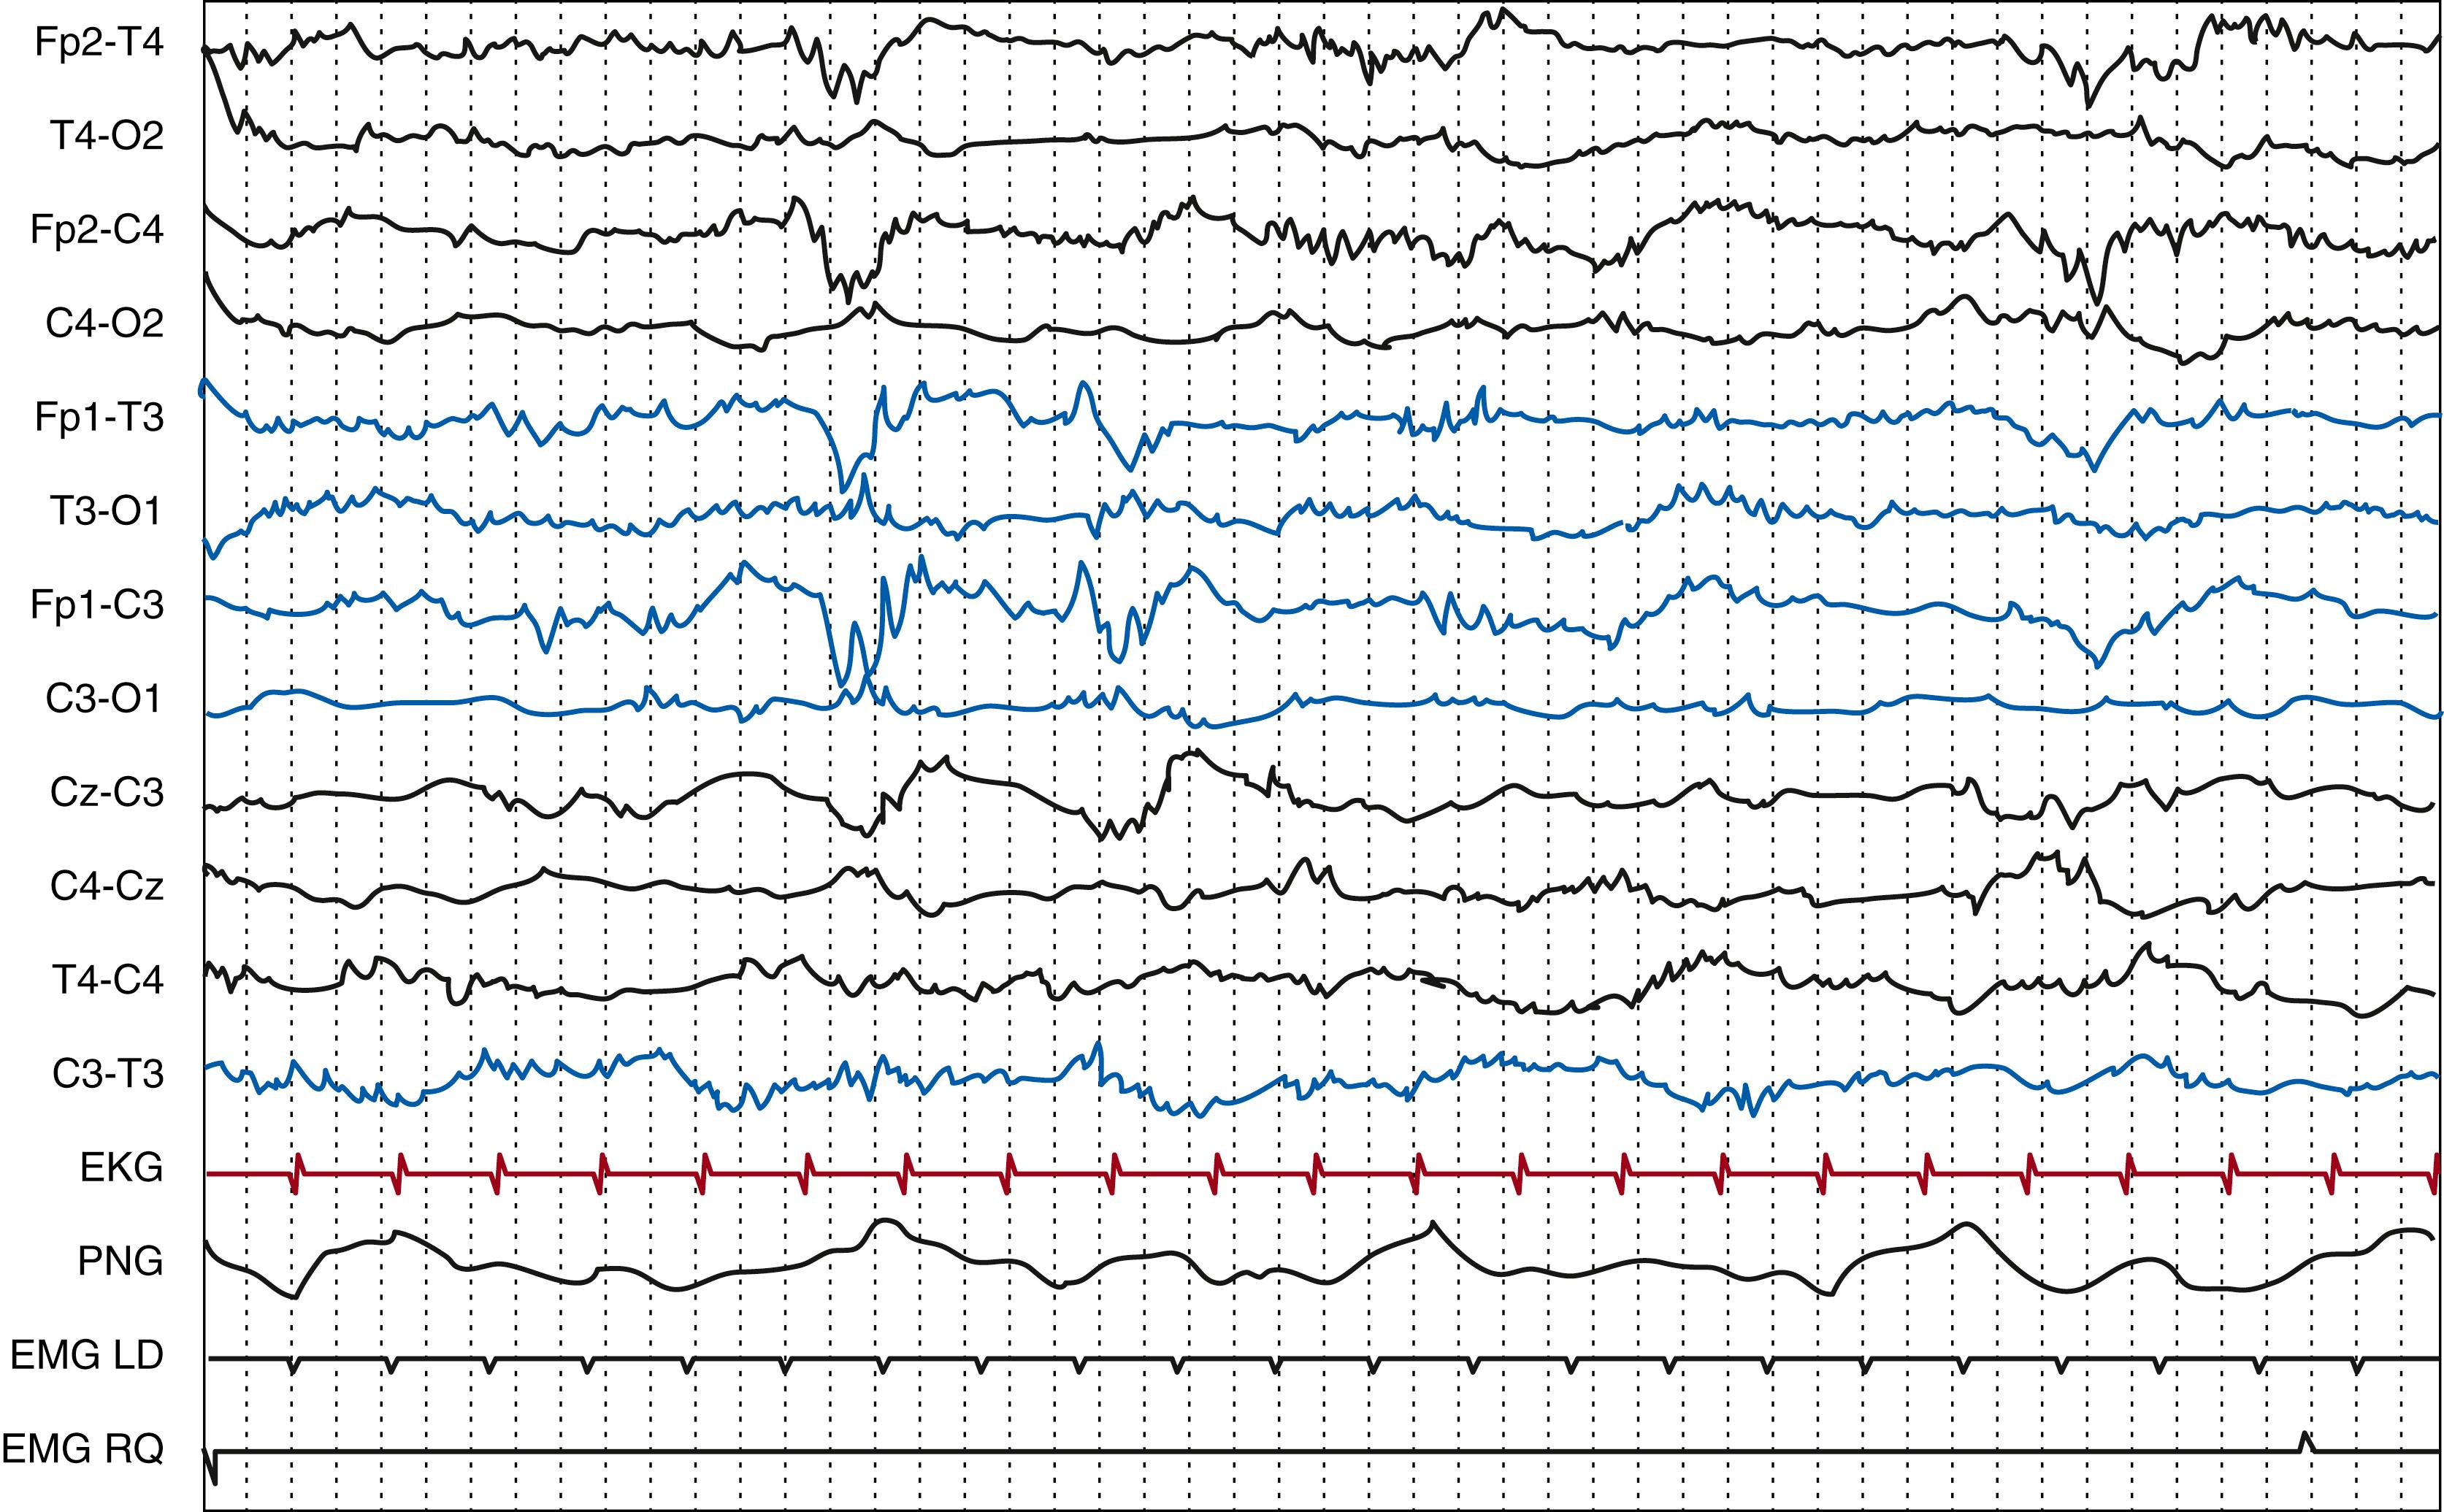 Fig. 130.8, Preterm newborn, 32 weeks gestational age. Active sleep. Continuous tracing with abundant bilateral delta brushes. Polygraphic electroencephalography recording (EKG, PNG: pneumogram, EMG LD: left deltoid; EMG RQ: right quadriceps). Gain, 15 μV/mm; high frequency filter, 70 Hz; paper speed, 30 mm/s.